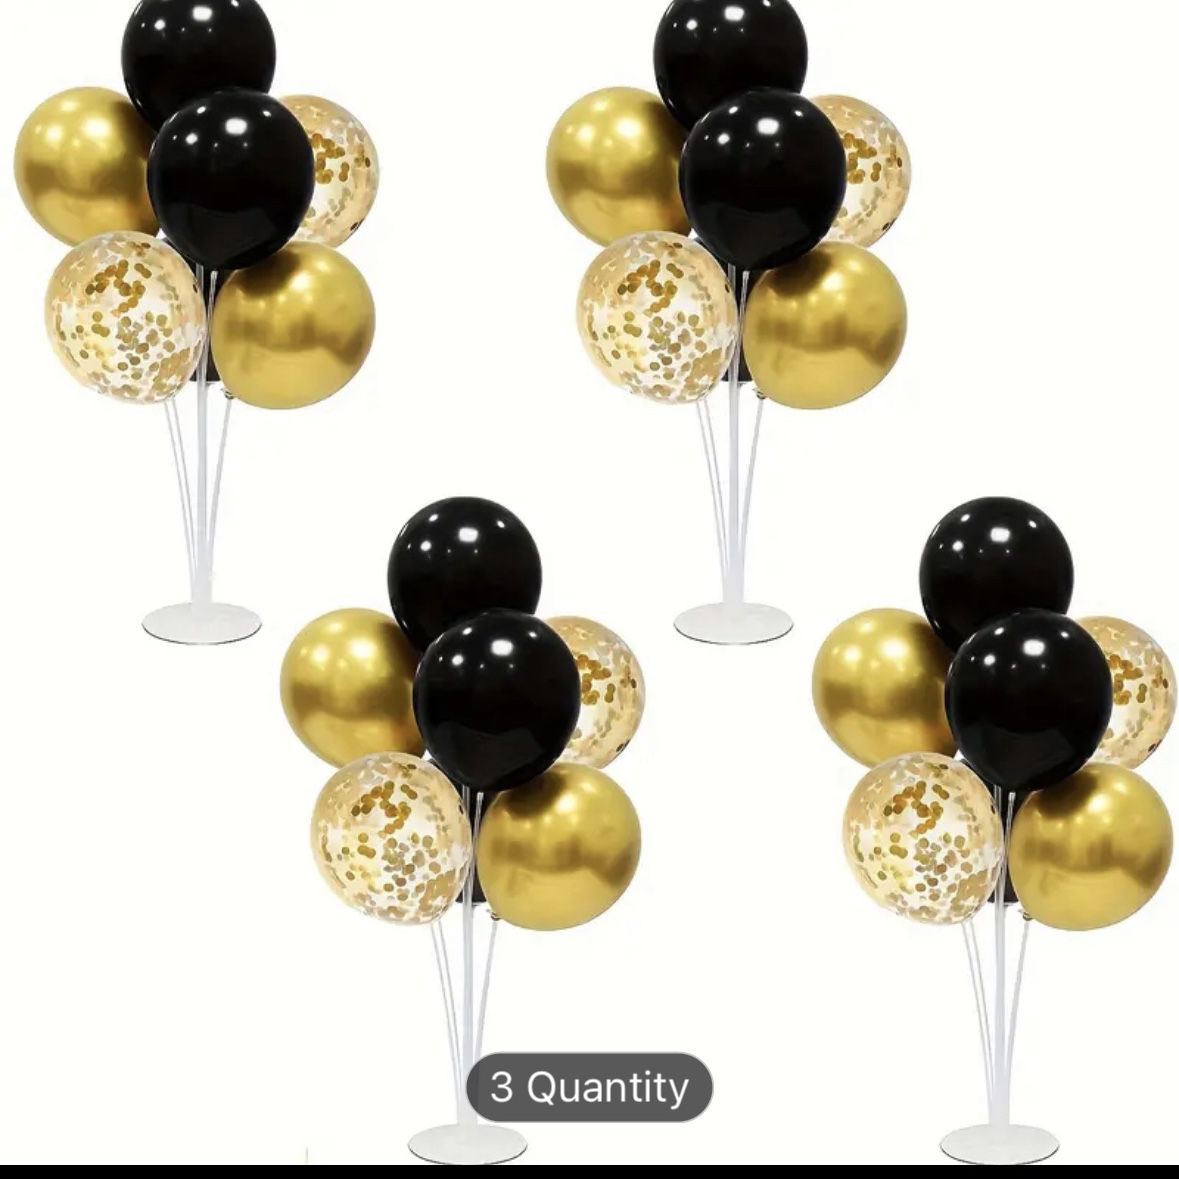 Centerpieces Balloons 3 Sets Of 4 (12 Total) Black And Gold 